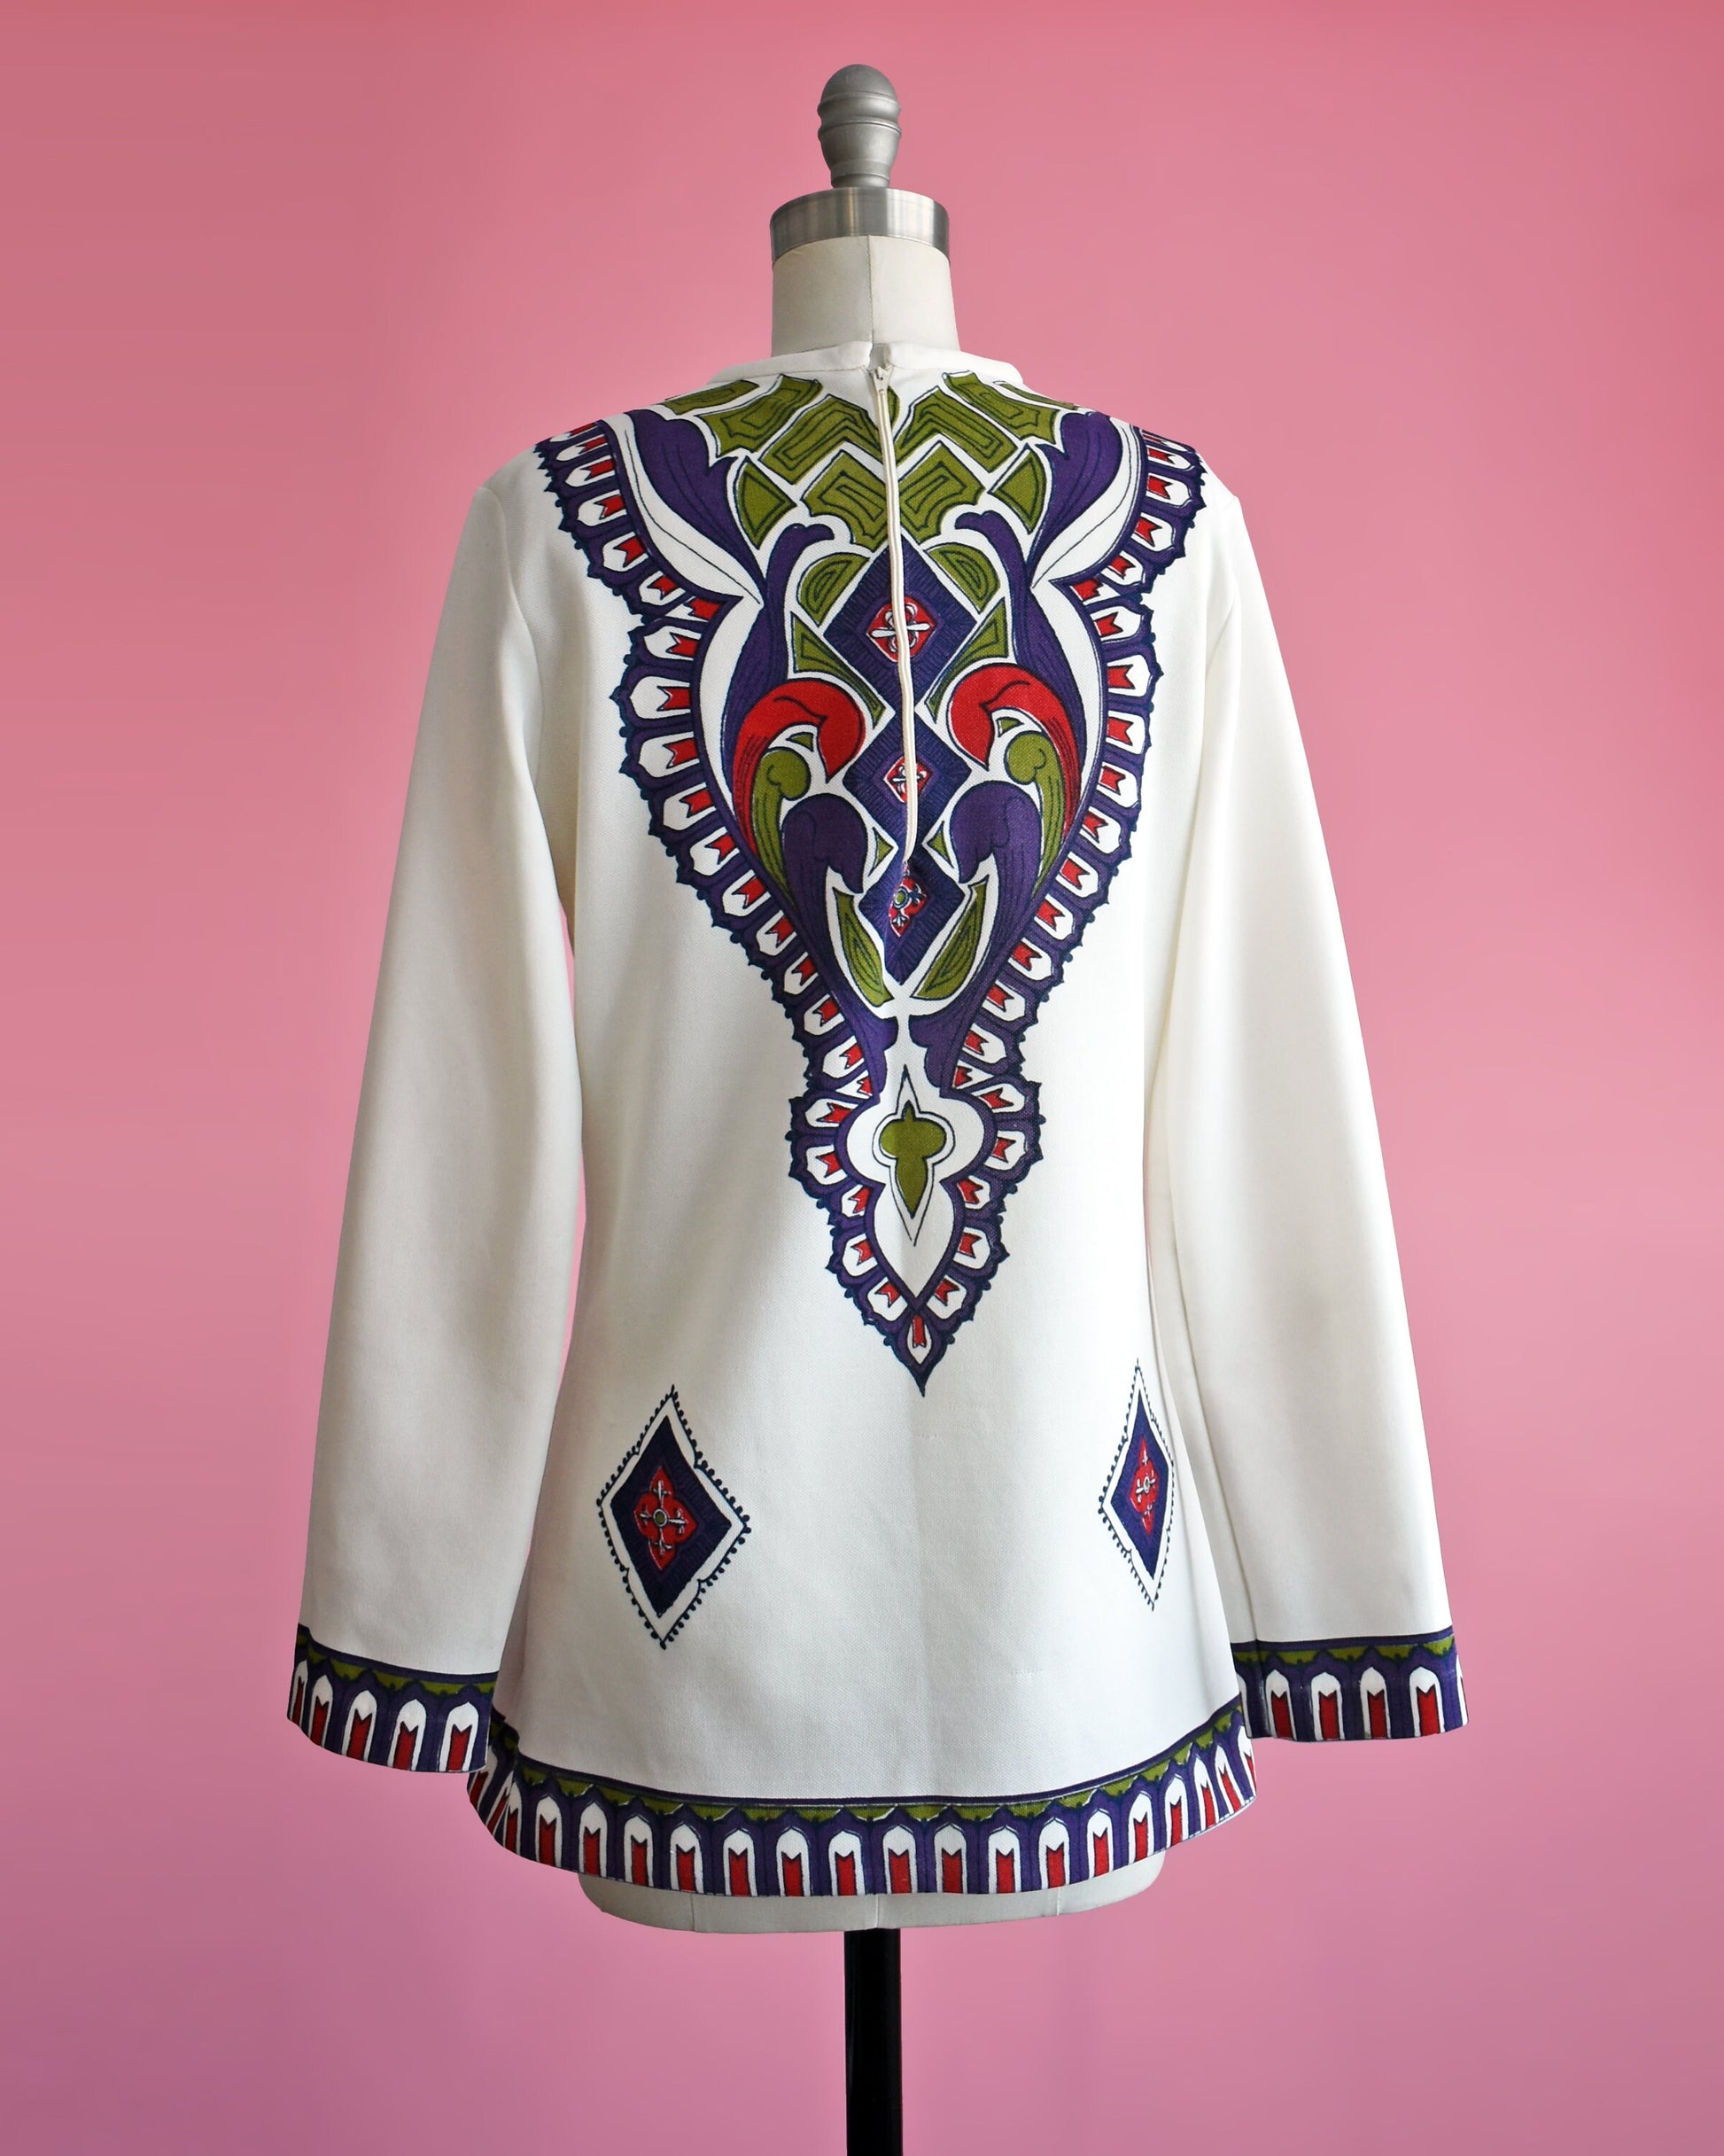 Back view of a vintage 60s/70s white tunic with a purple, green, red, and black psychedelic print on the back. Matching print along the hem and long sleeve cuffs. The top is on a dress form.